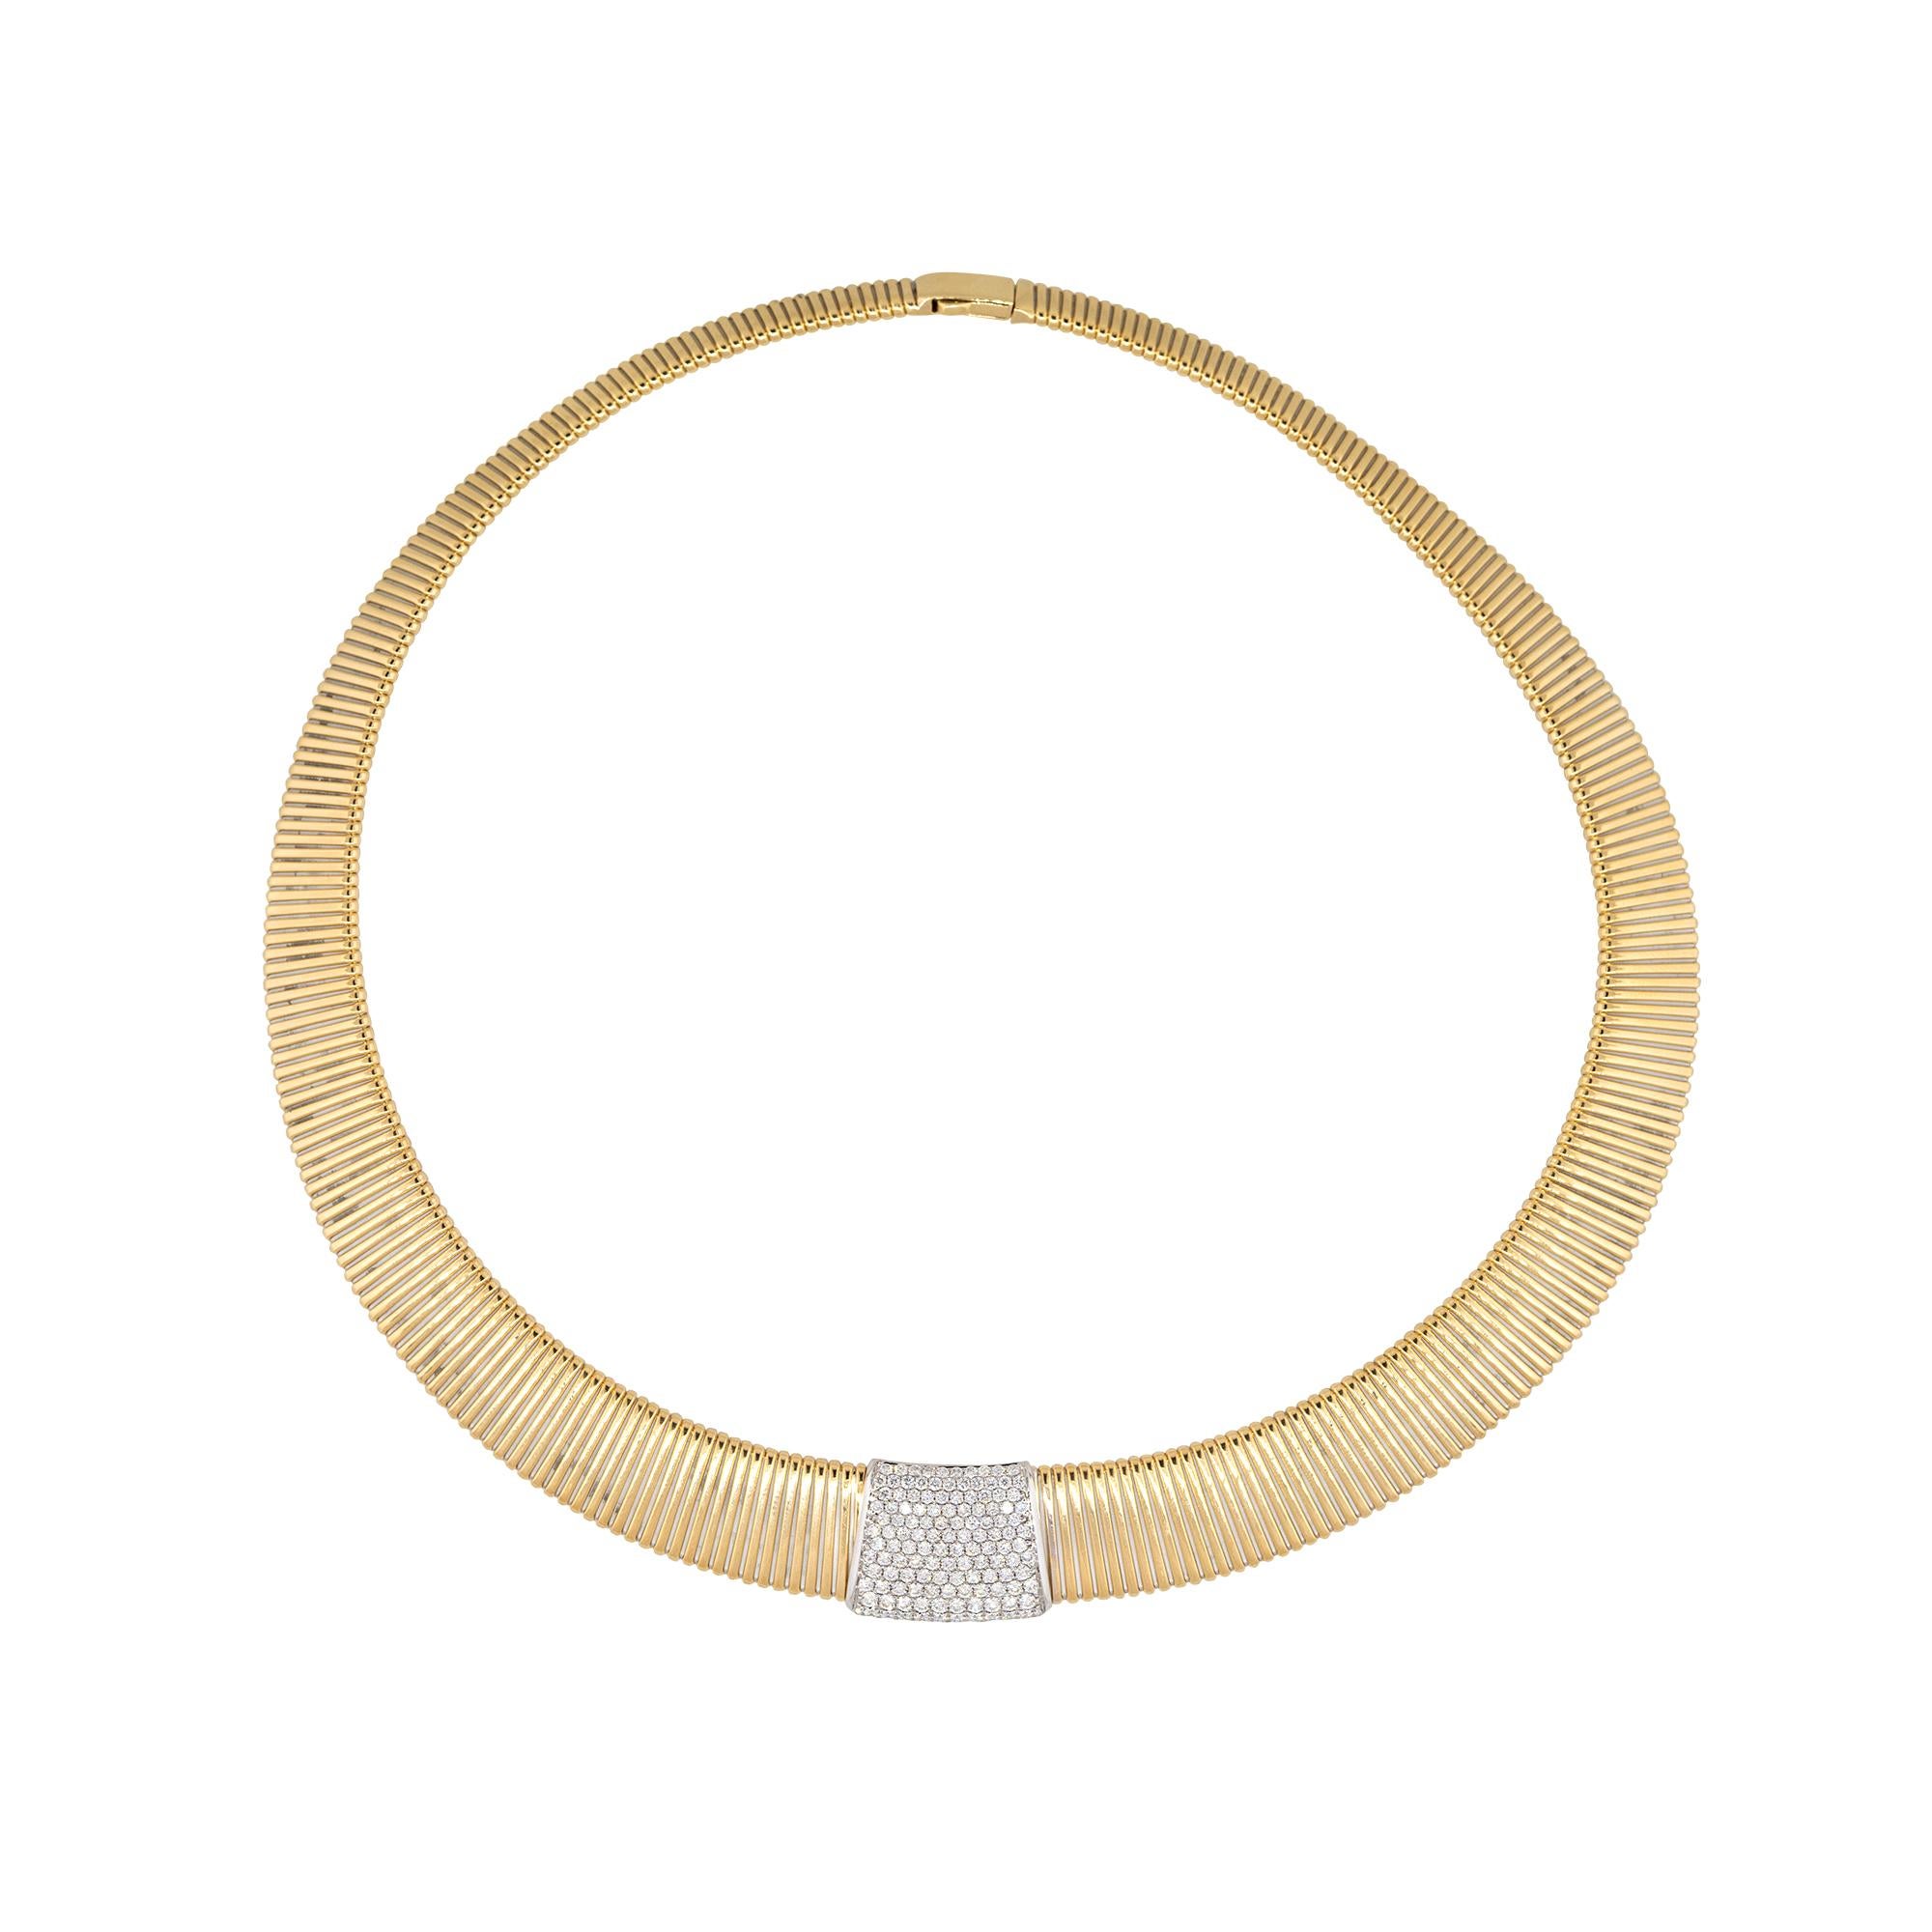 18k Two-Tone Gold 1.56ctw Pave Diamond Station Ribbed Collar Necklace

Product: Pave Diamond Station Collar Necklace
Material: 18 Karat White and Yellow Gold
Diamond Details: There are approximately 1.56 carats of Round Brilliant cut